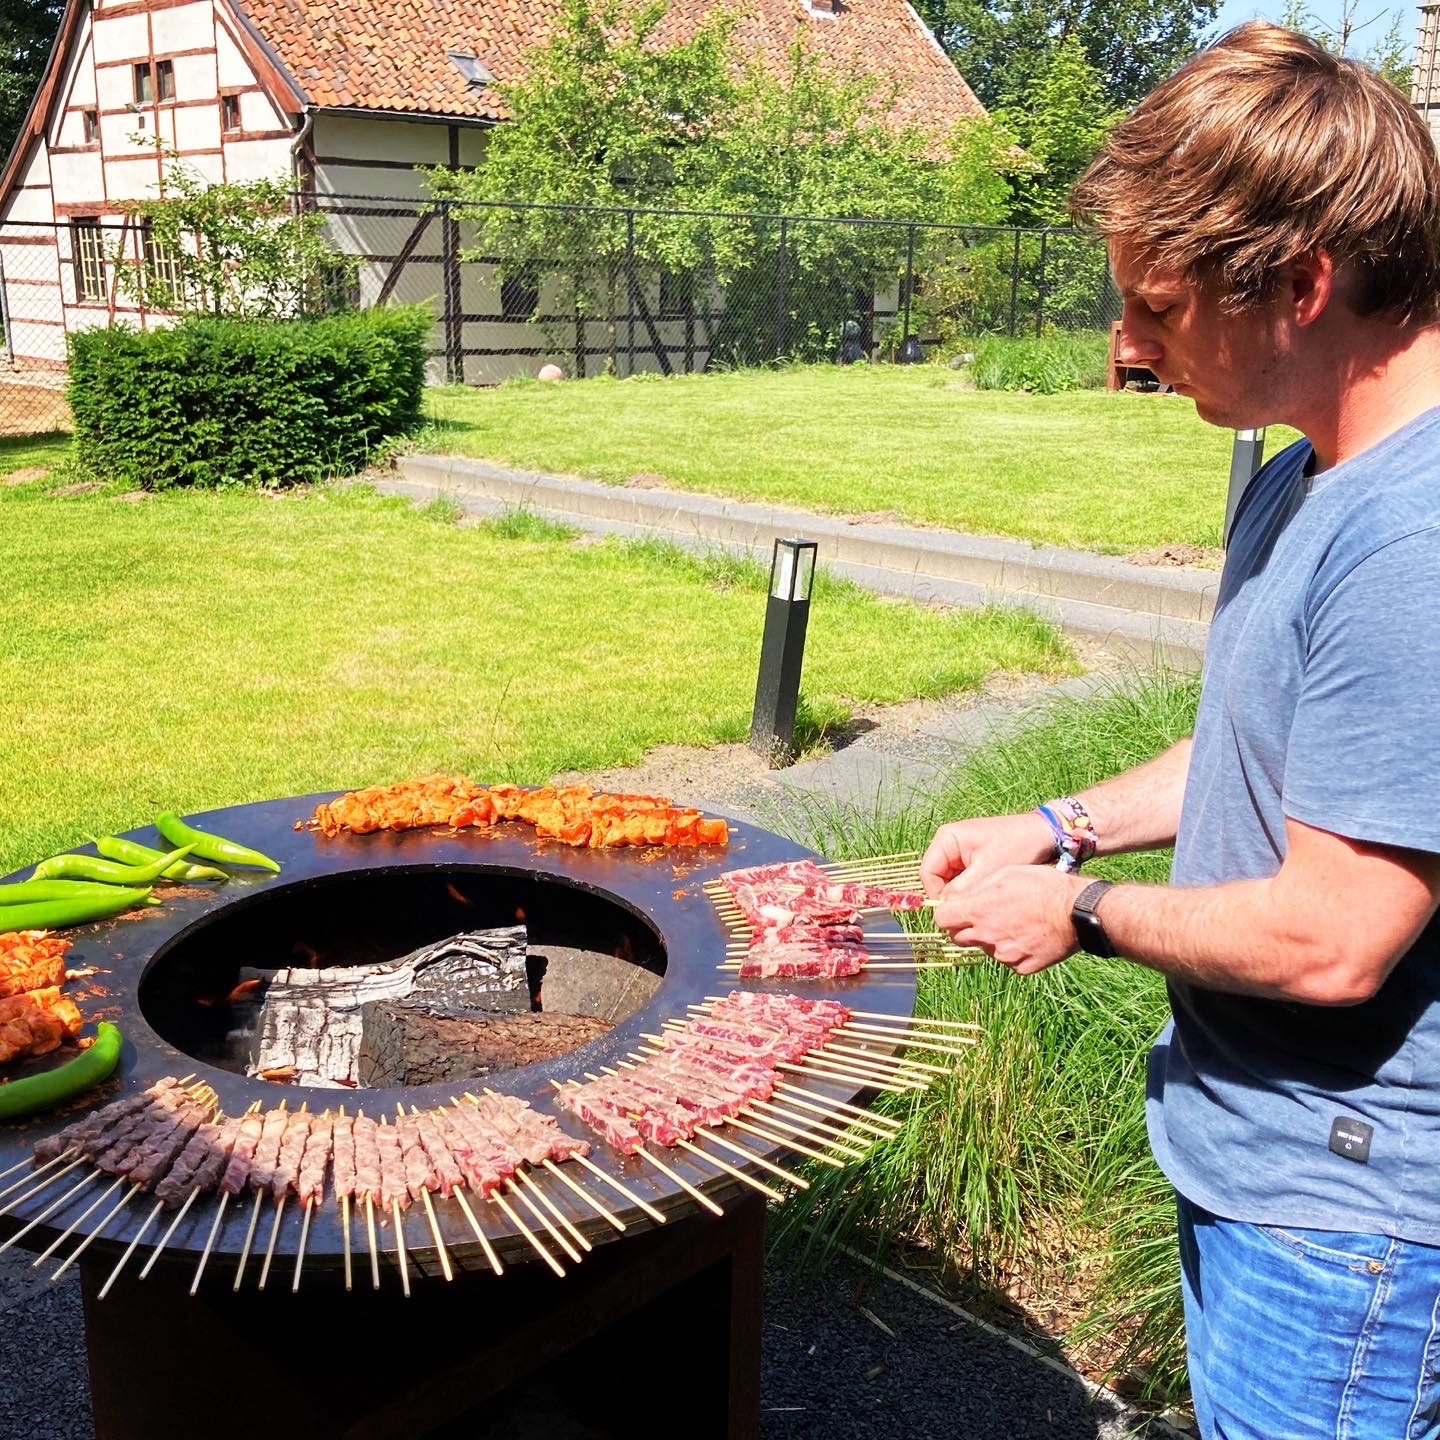 Wouter stokjesbarbecue datalink